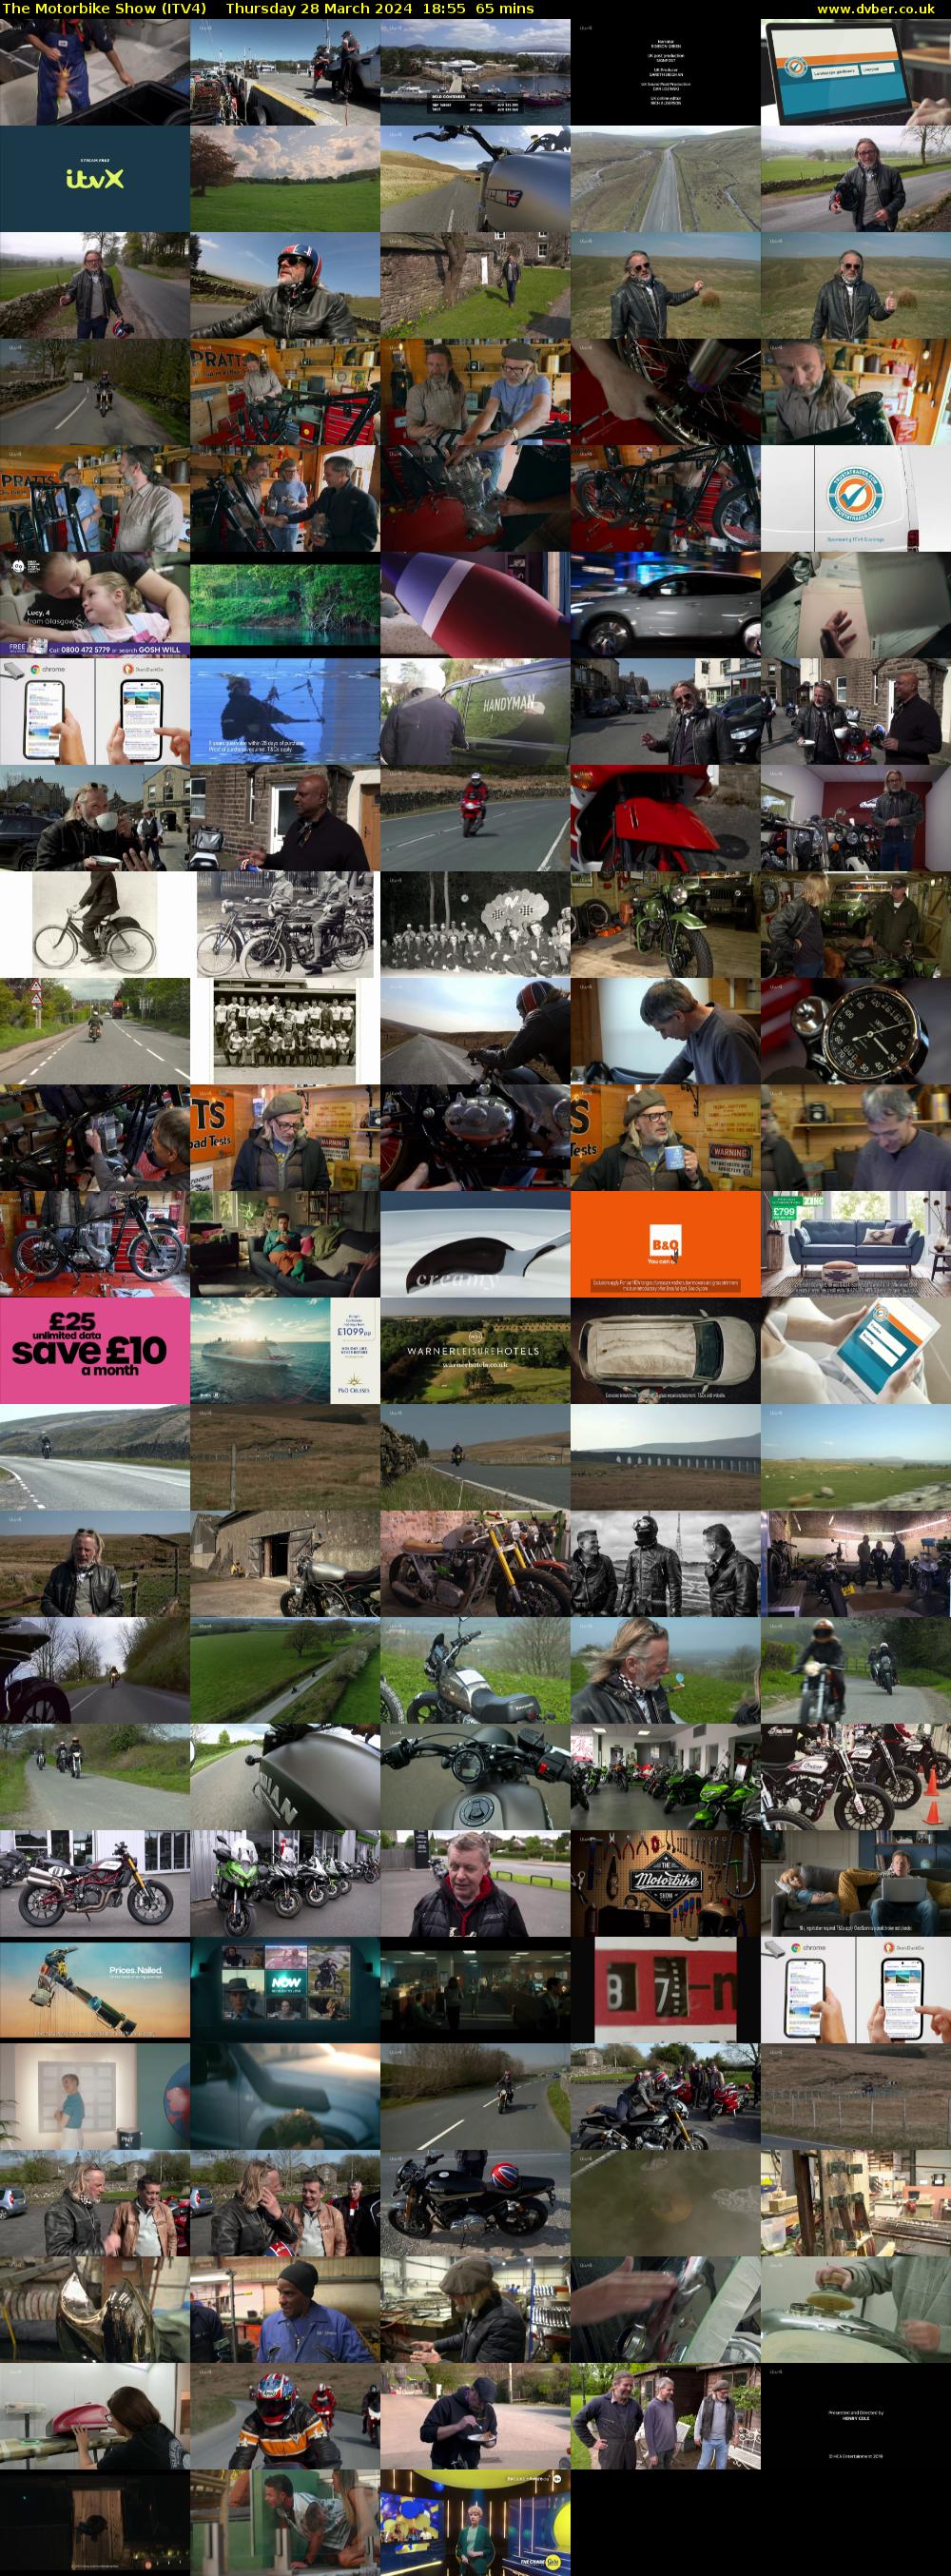 The Motorbike Show (ITV4) Thursday 28 March 2024 18:55 - 20:00